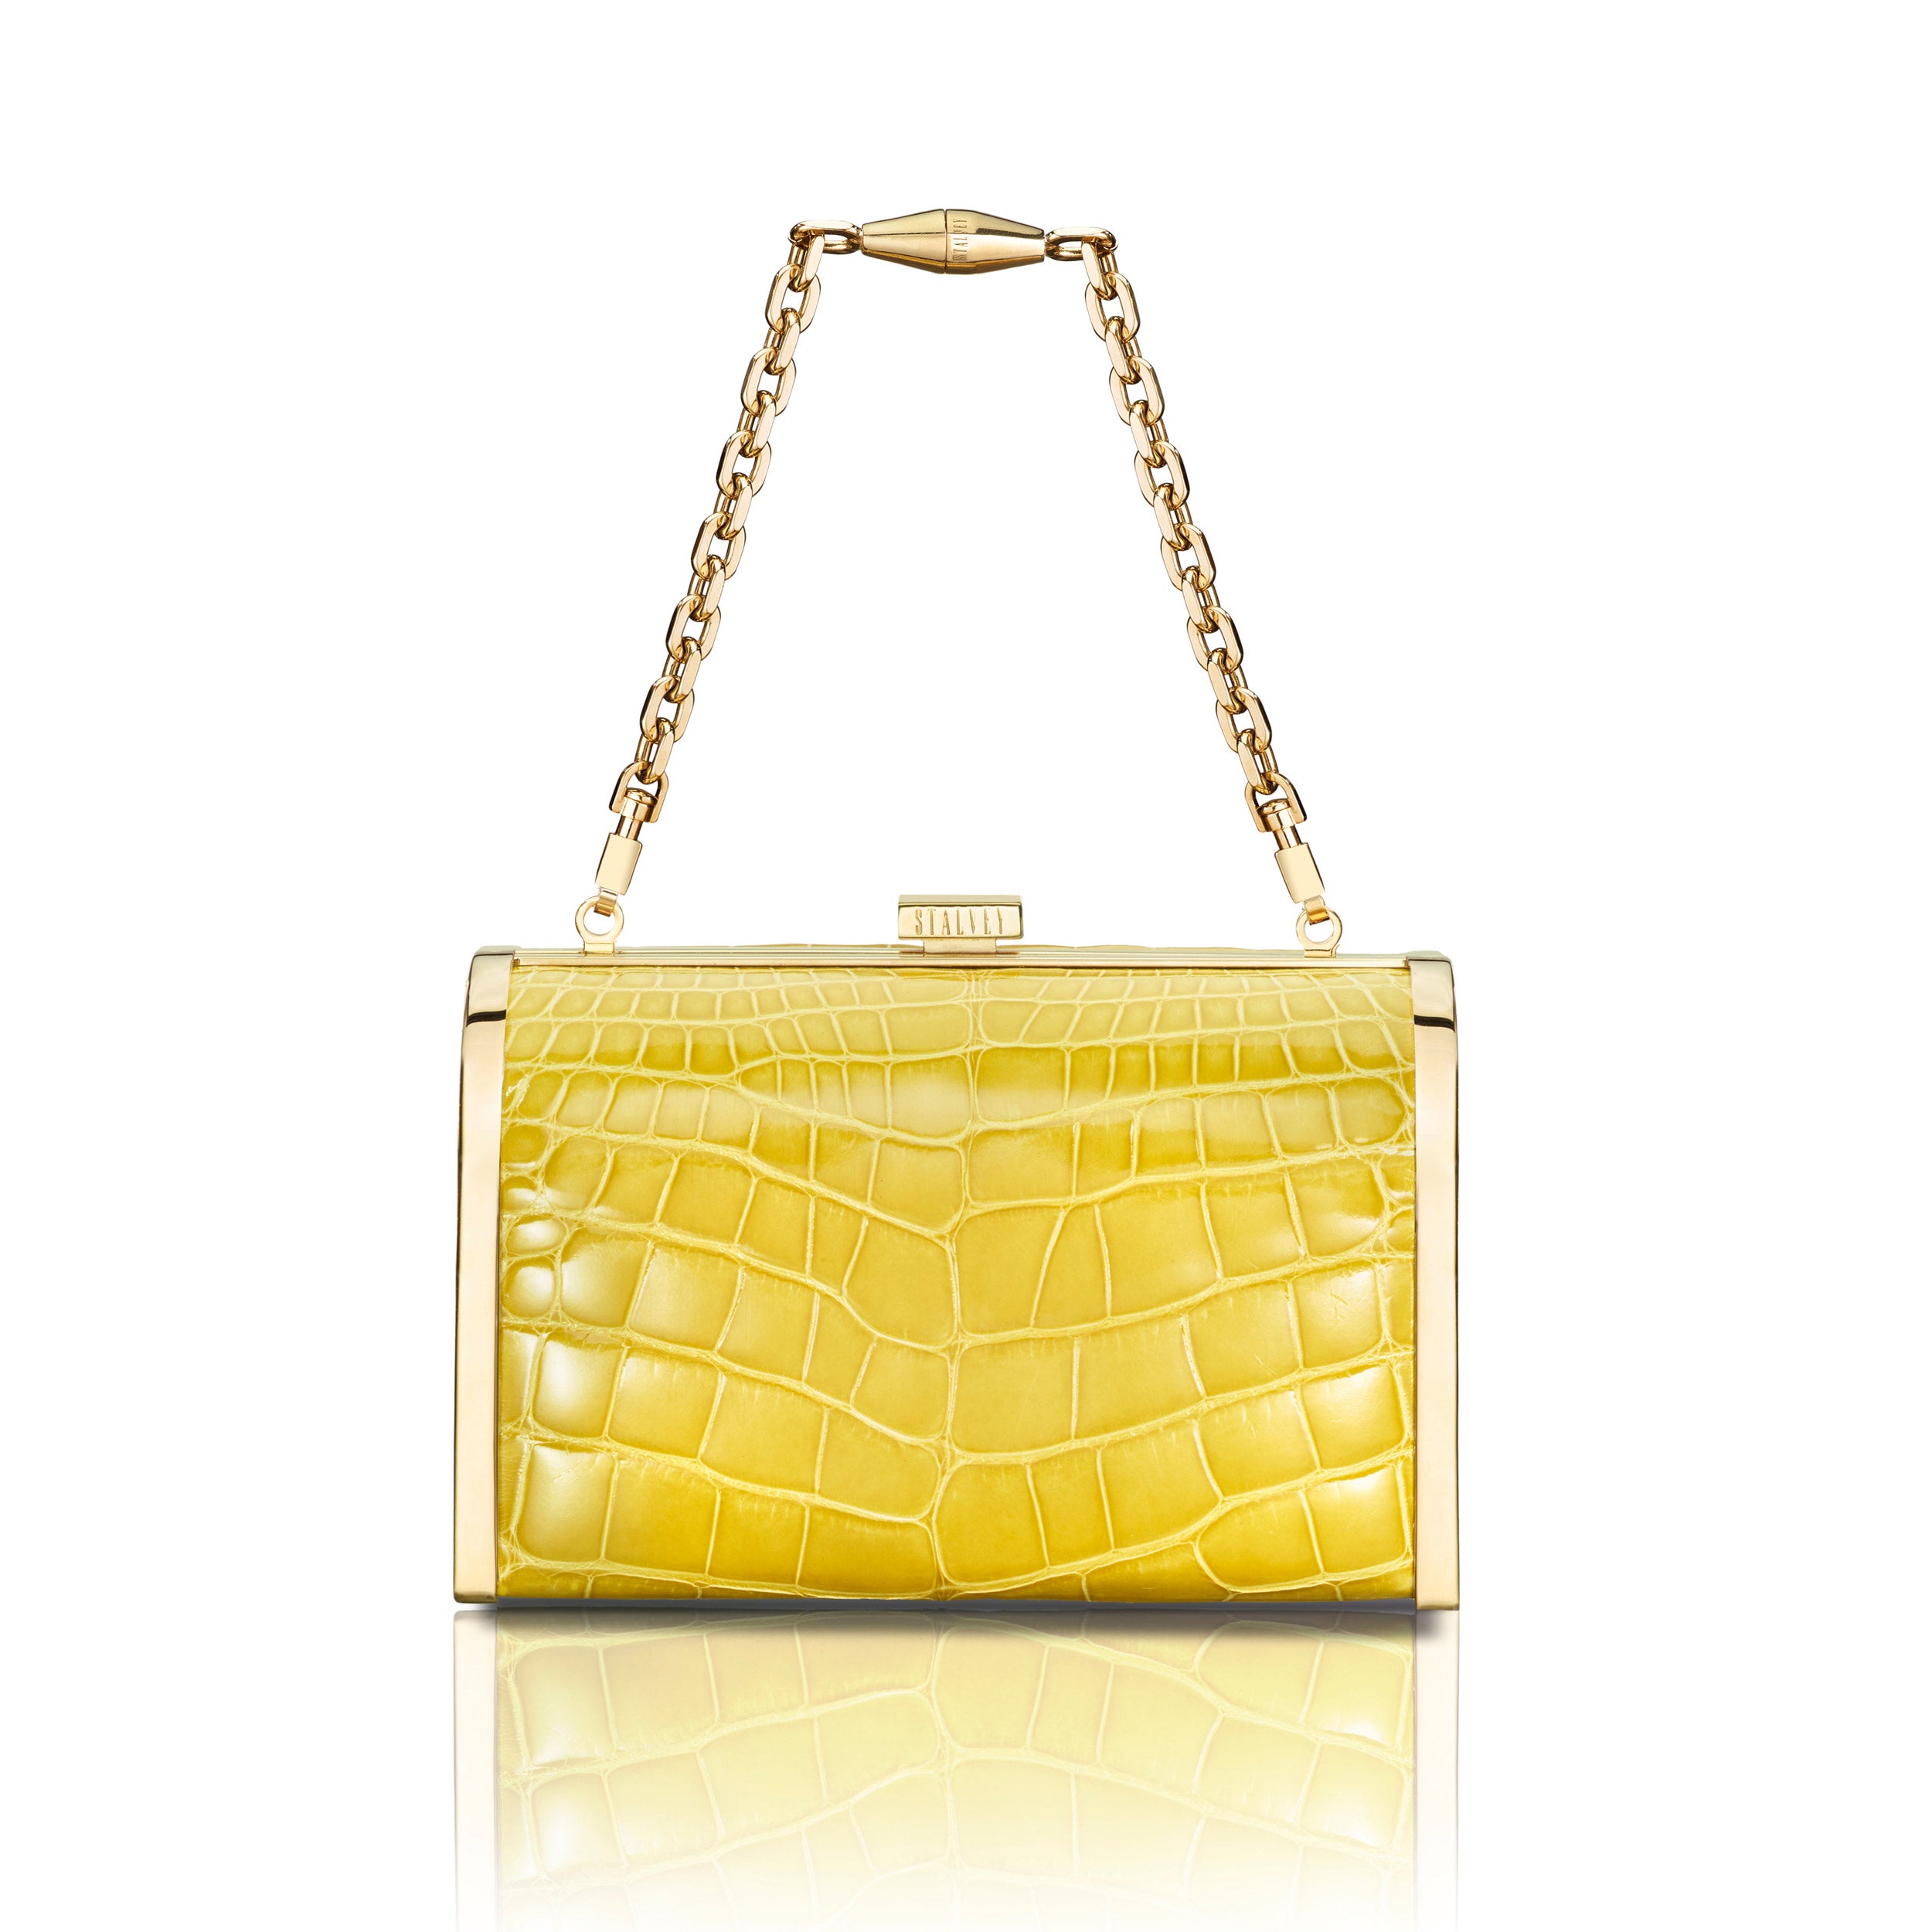 STALVEY Rounded Clutch in Yellow Alligator with 24kt Gold Hardware Front View with Chain